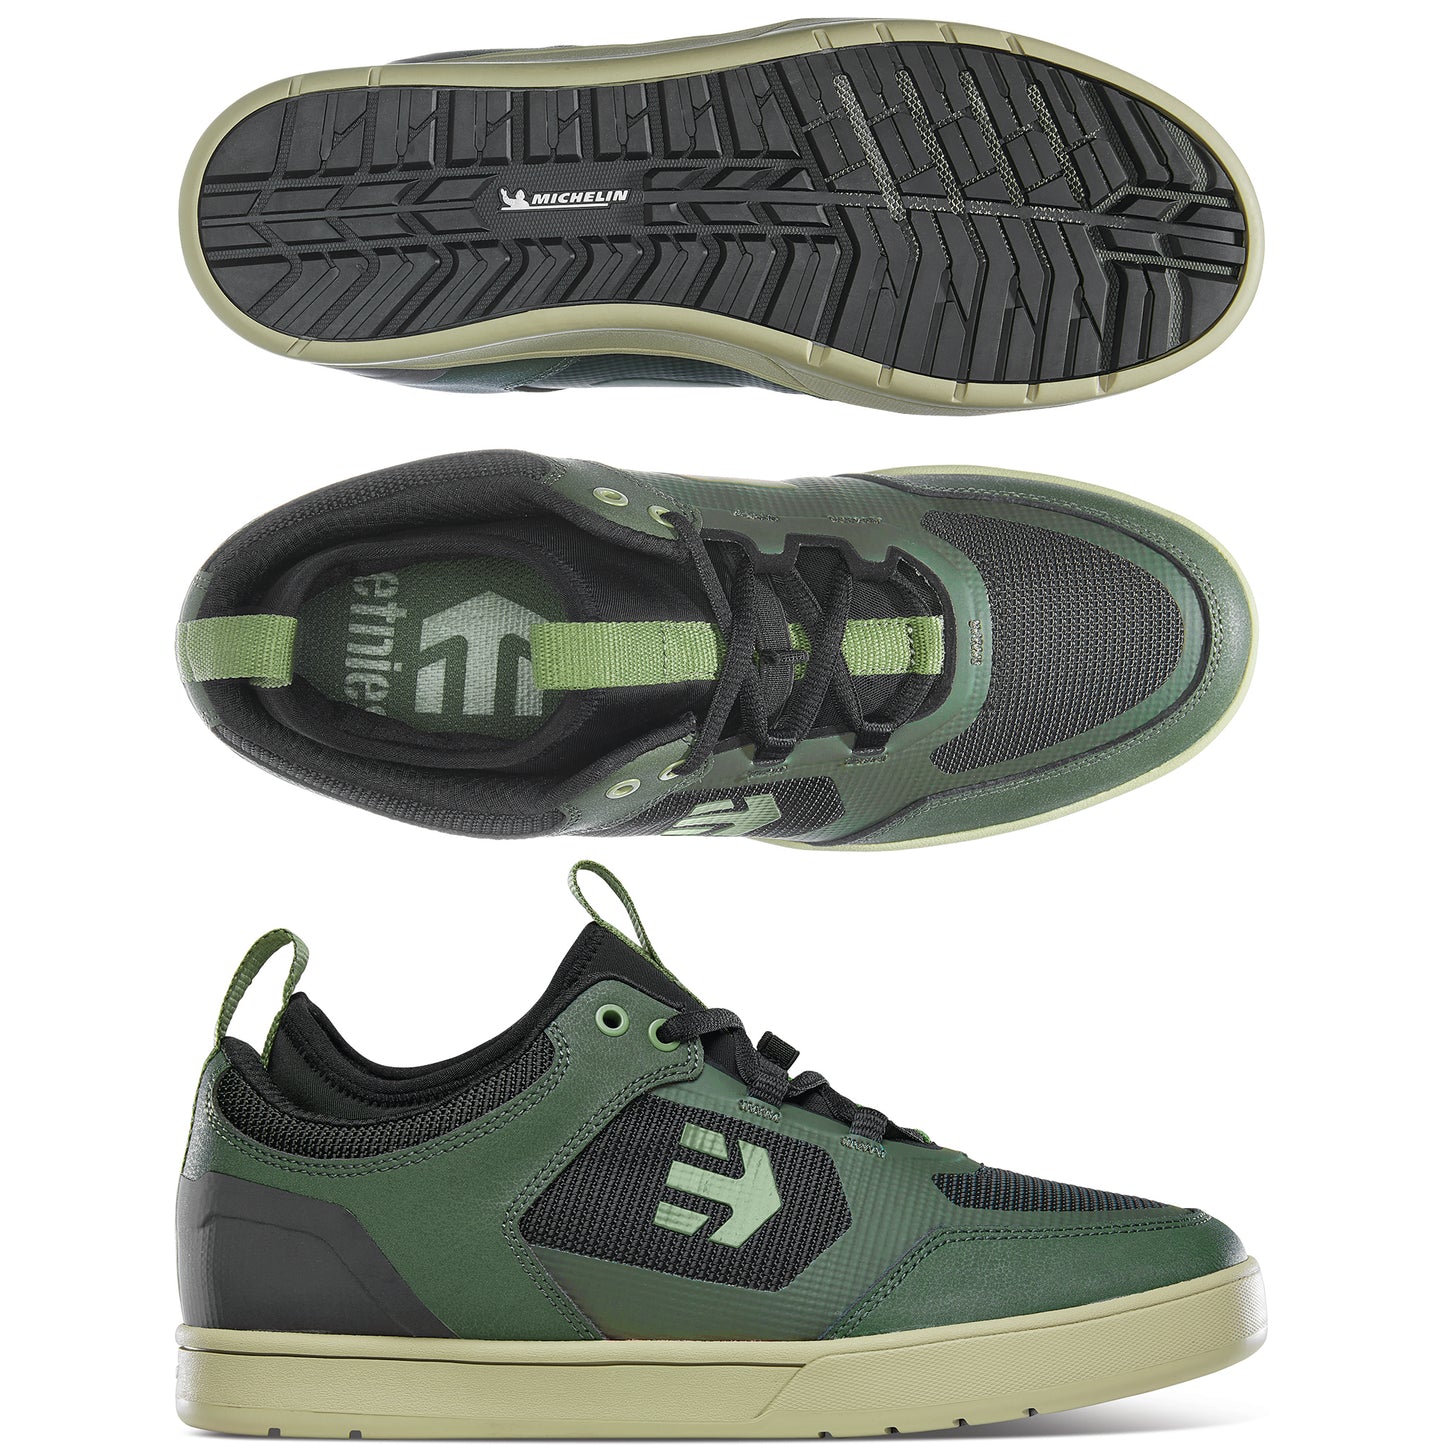 Etnies Camber Pro Flat Shoes - US 10.0 - Green - Black